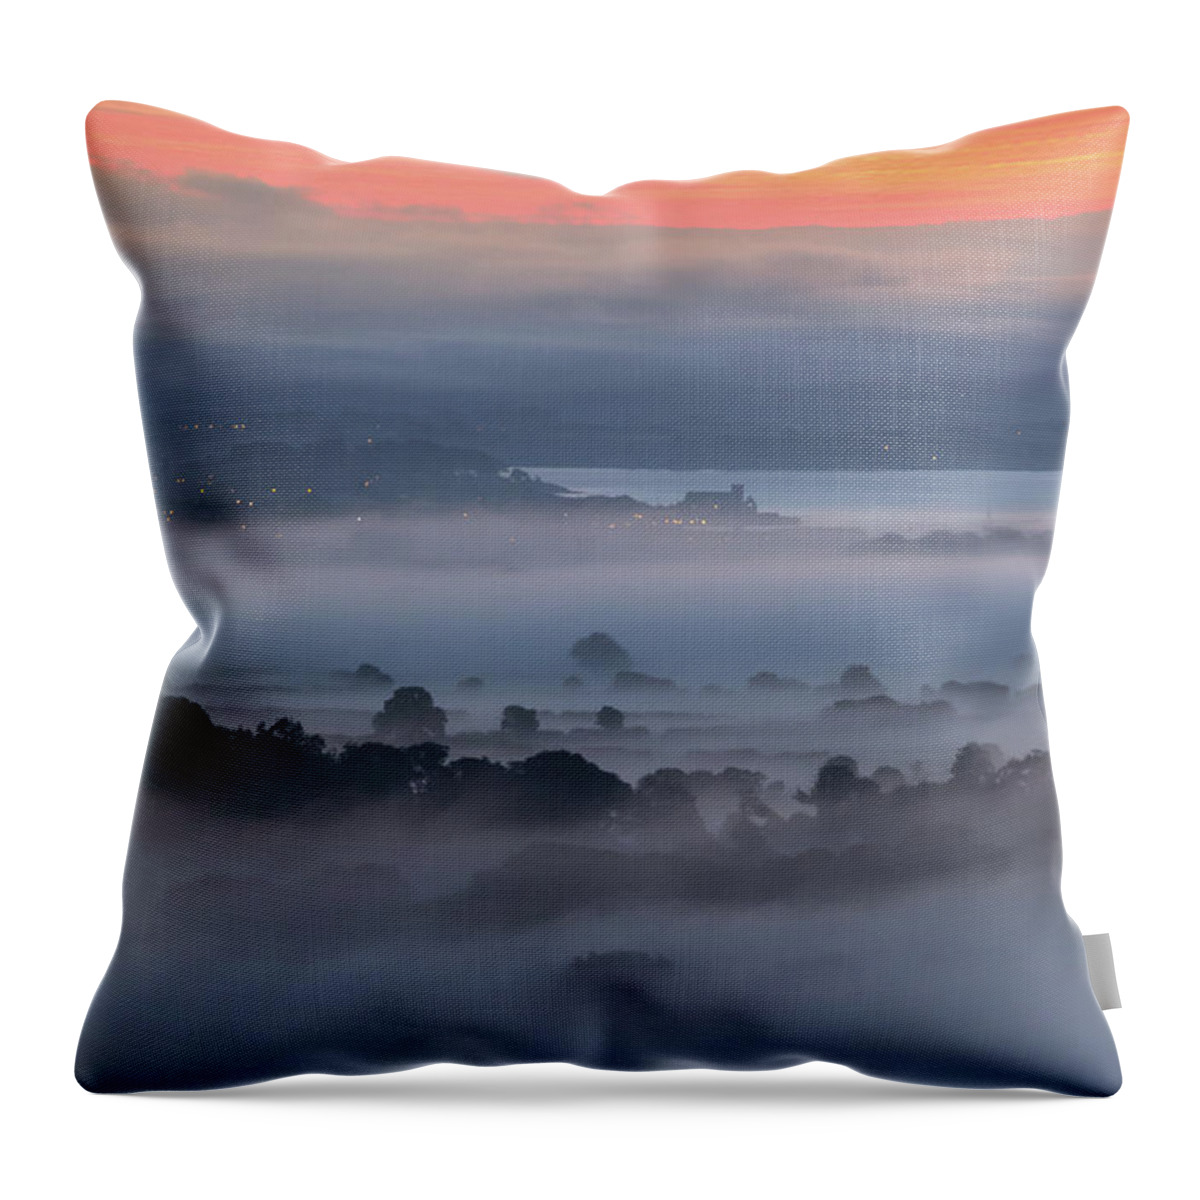 Scenics Throw Pillow featuring the photograph Atmosphere Low Cloud Dungarvan Ireland by Pete Burclaff Photographic